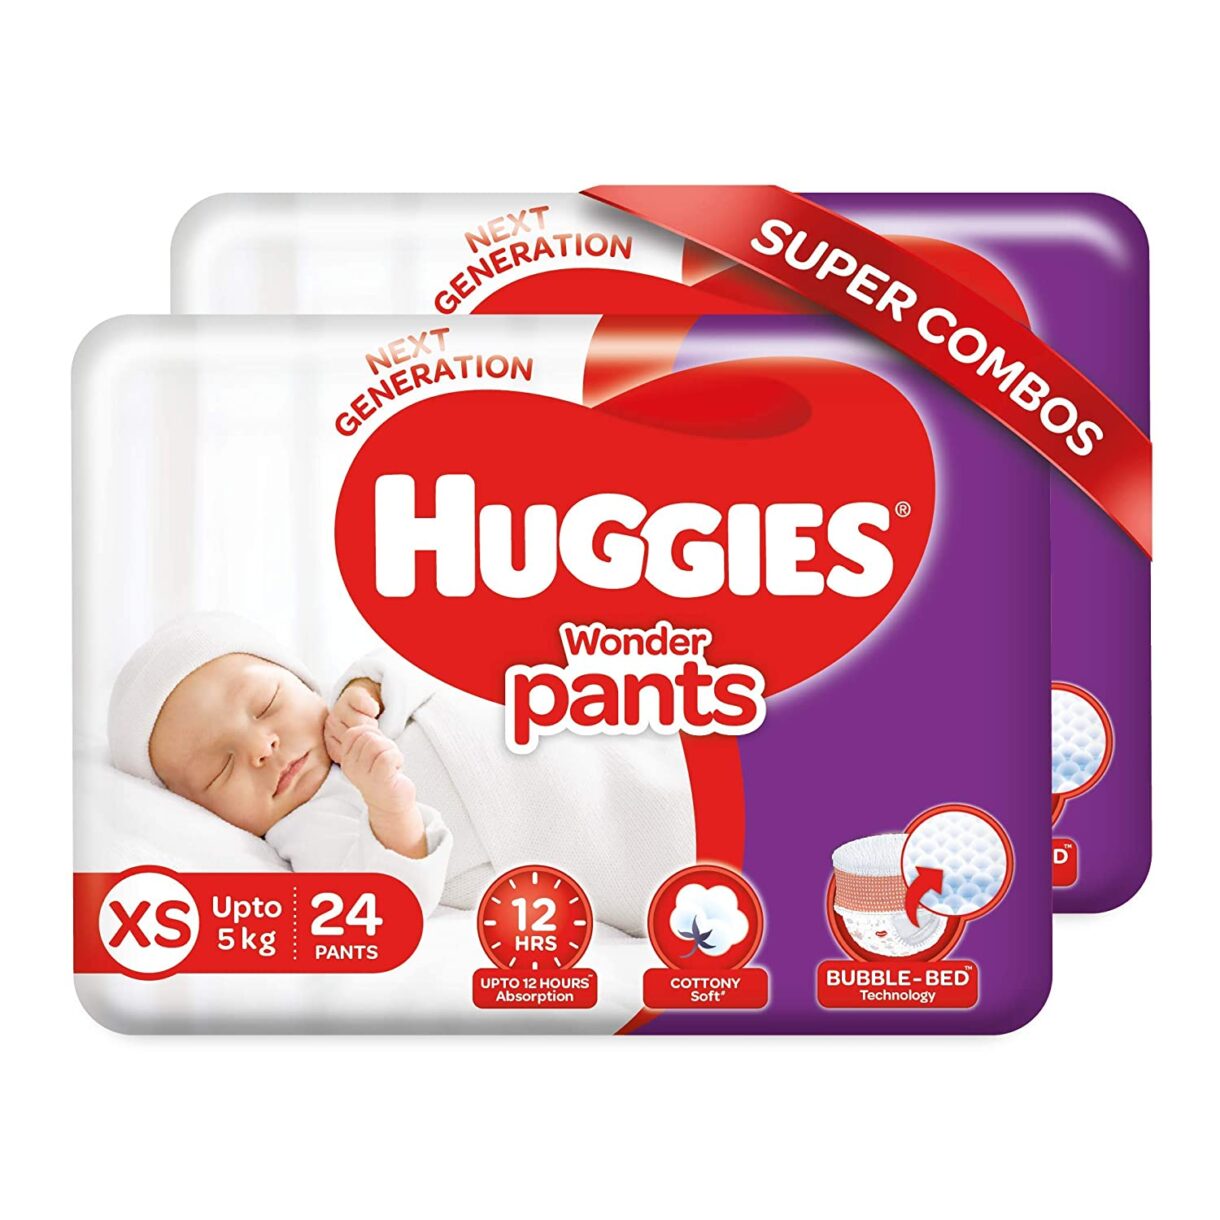 Huggies Wonder Pants Extra Small - New Born (XS - NB) Size Diaper Pants Combo Pack of 2, total 48 Count